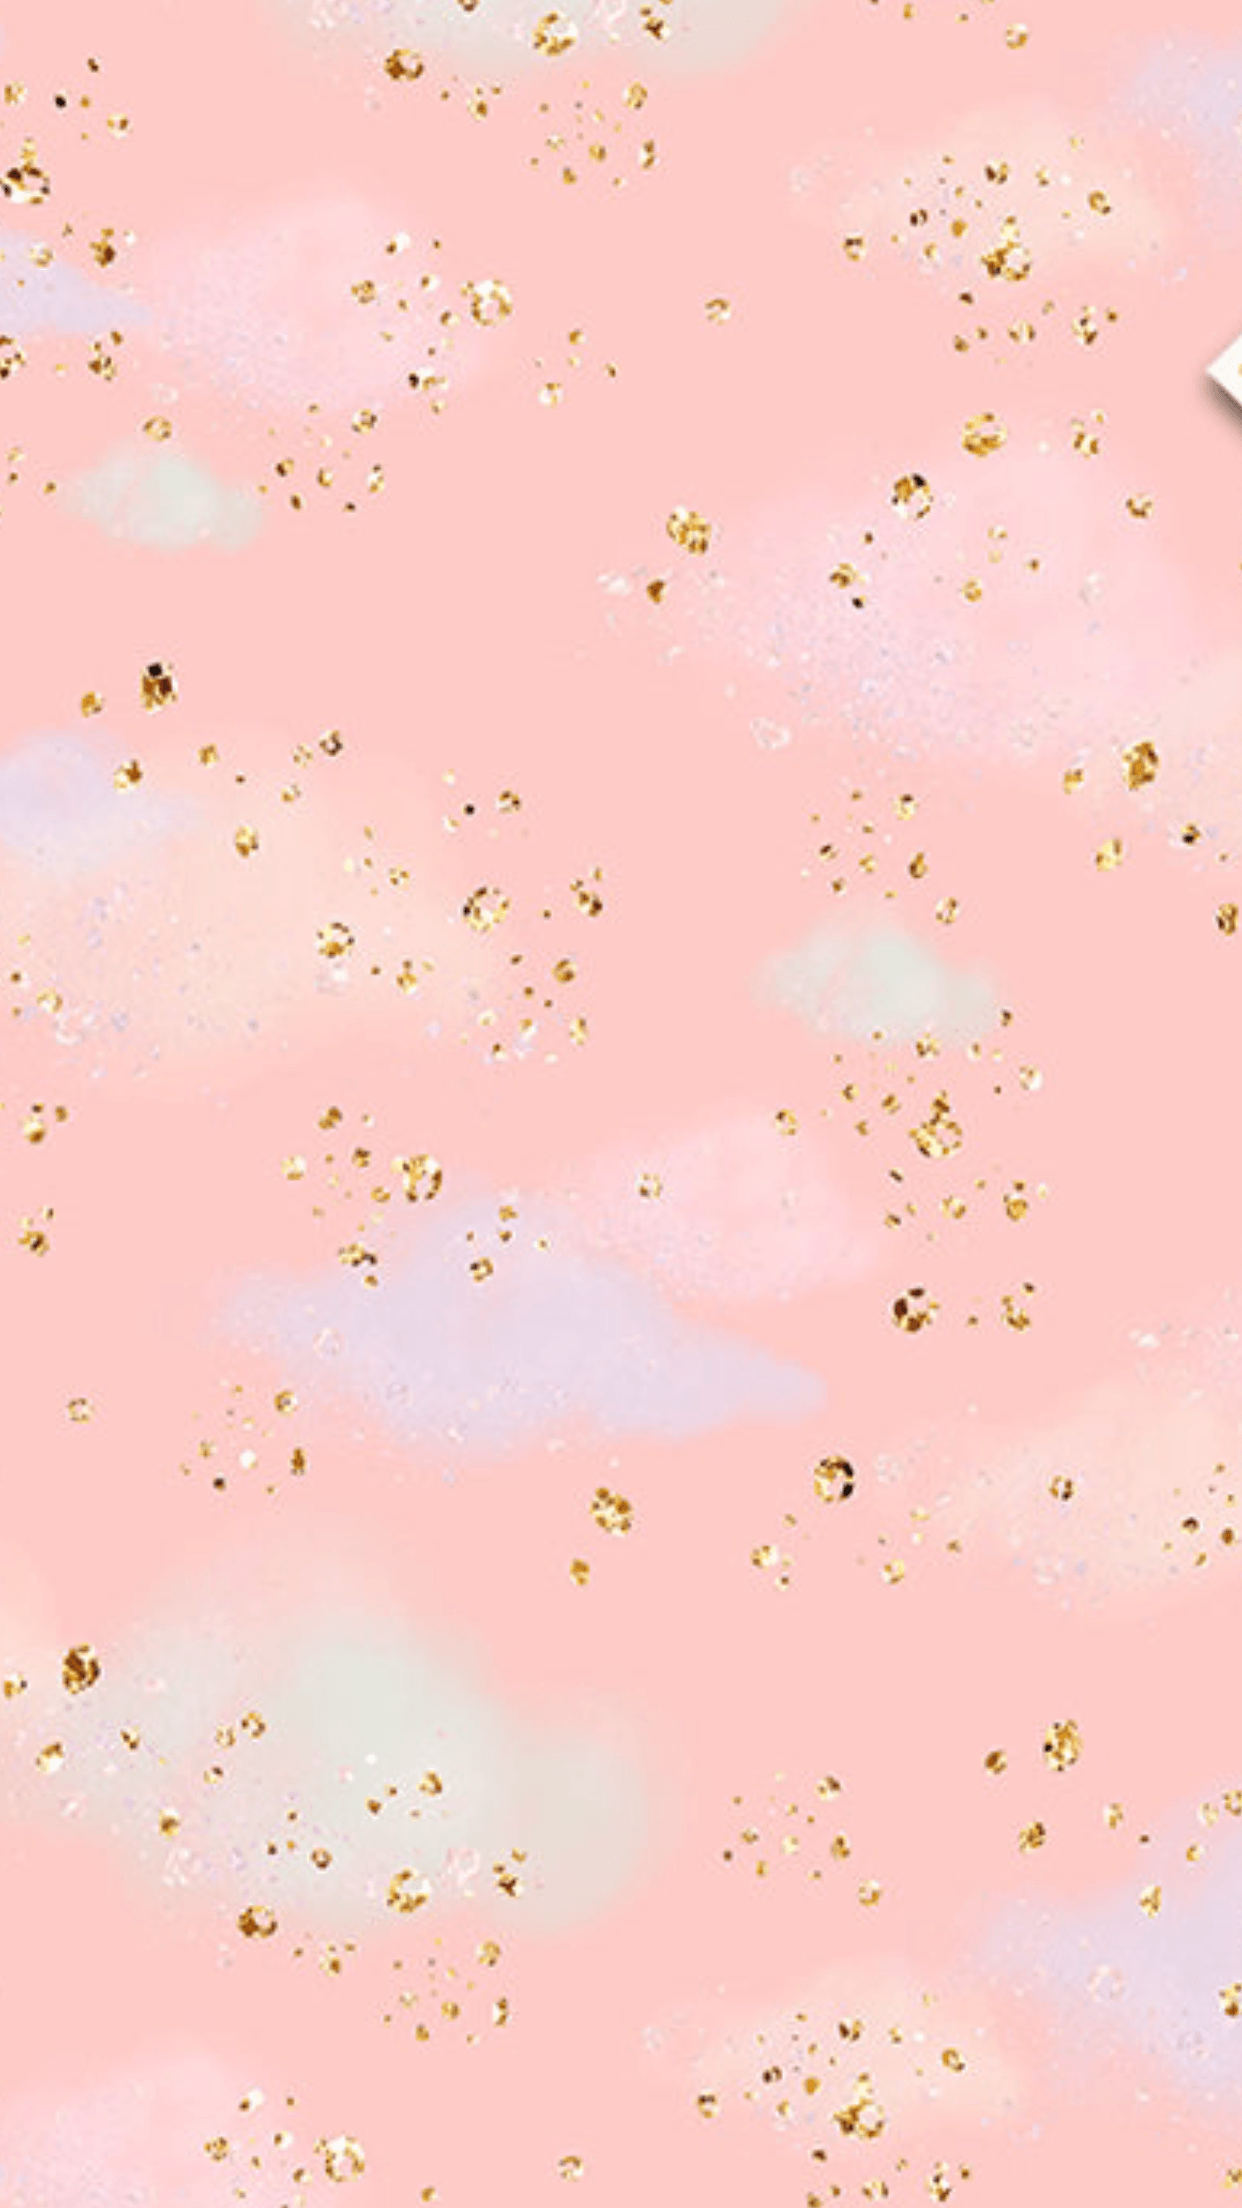 Girly wallpaper for your phone